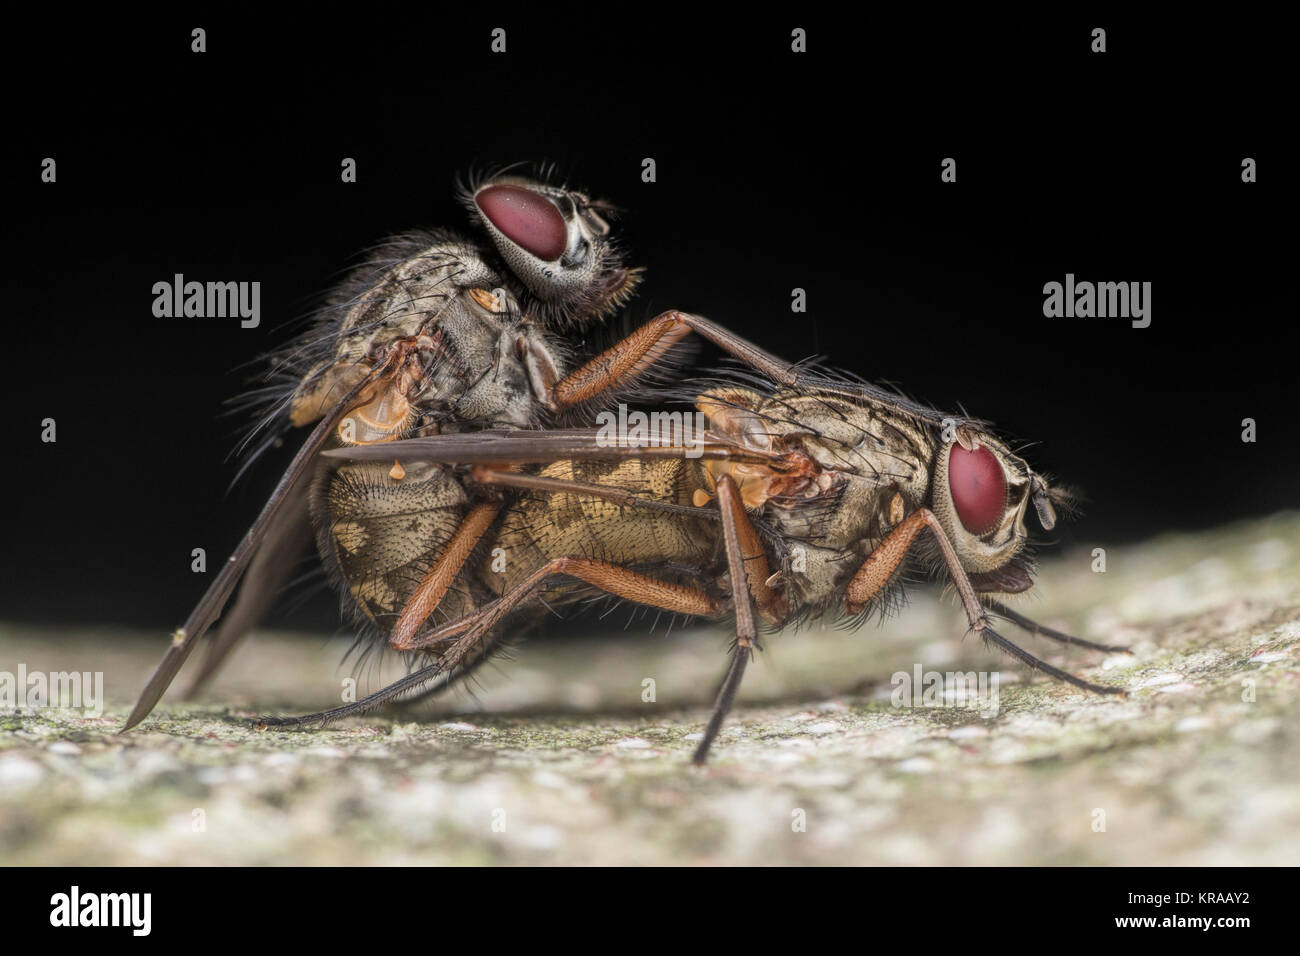 https://c8.alamy.com/comp/KRAAY2/a-pair-of-mating-flies-in-the-muscidae-family-on-a-tree-trunk-in-woodland-KRAAY2.jpg